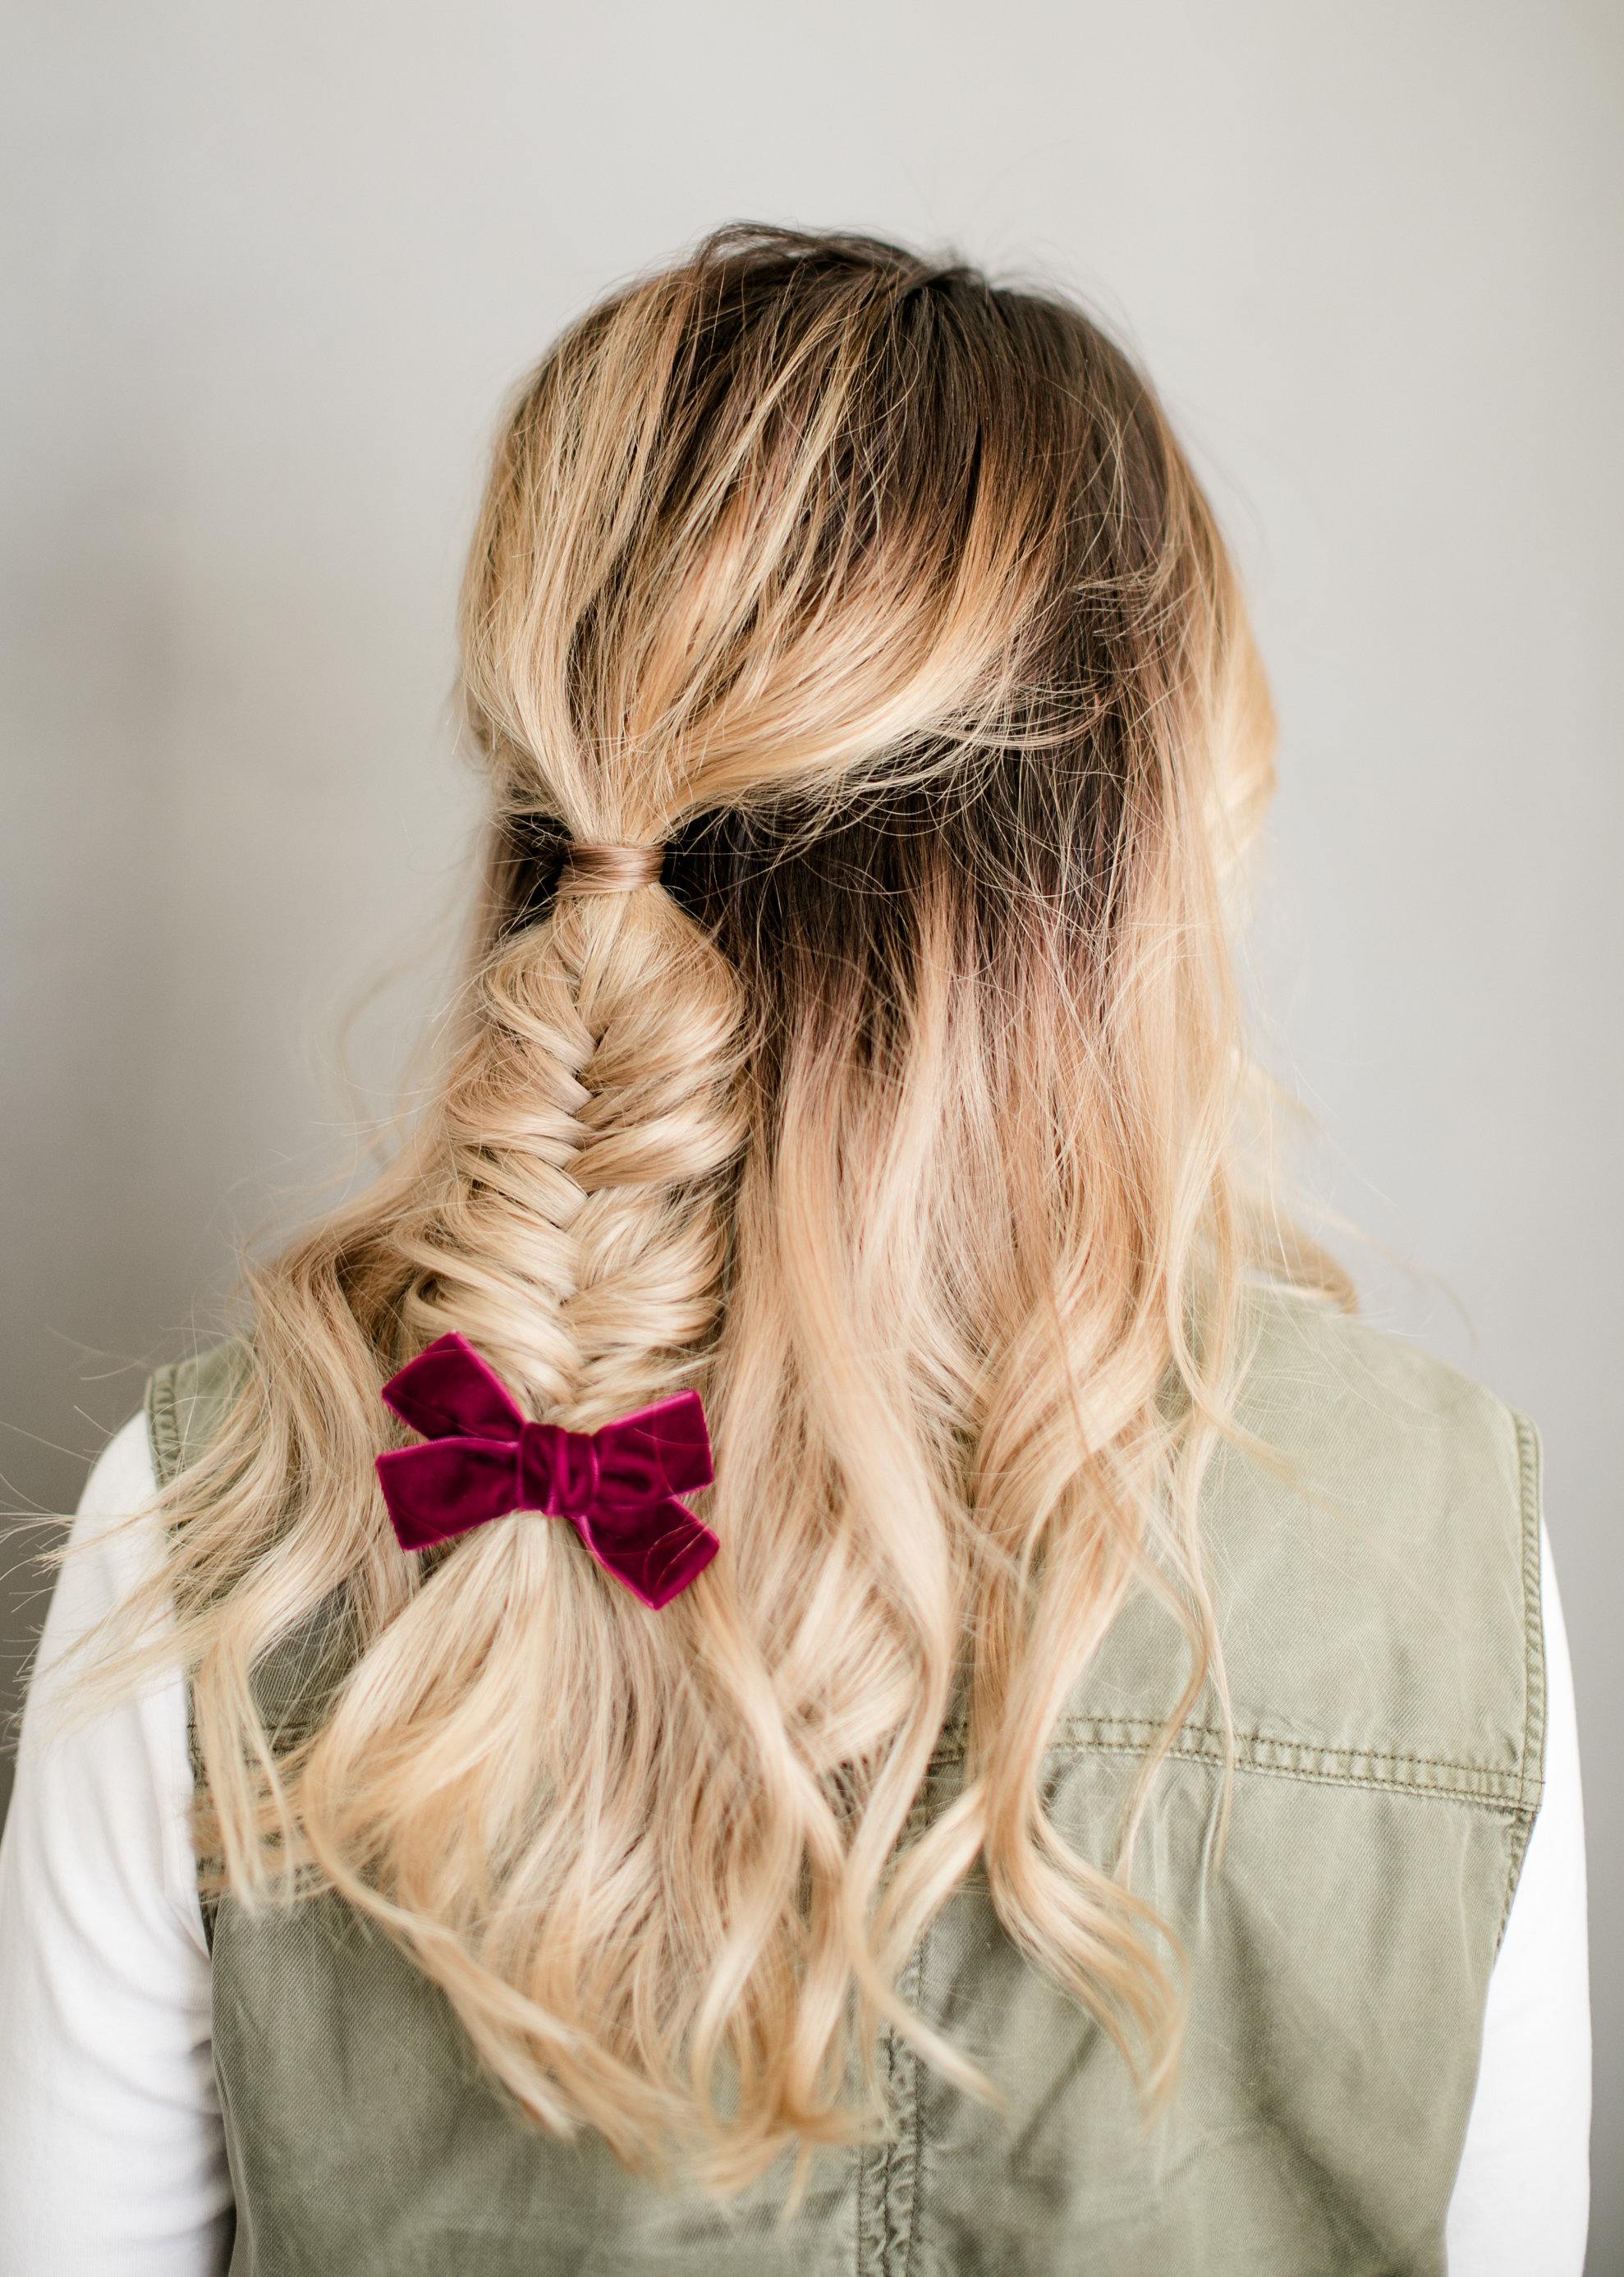 15 Ways to Wear a Ribbon | MISSY SUE | Hair beauty, Hair styles, Hairstyle